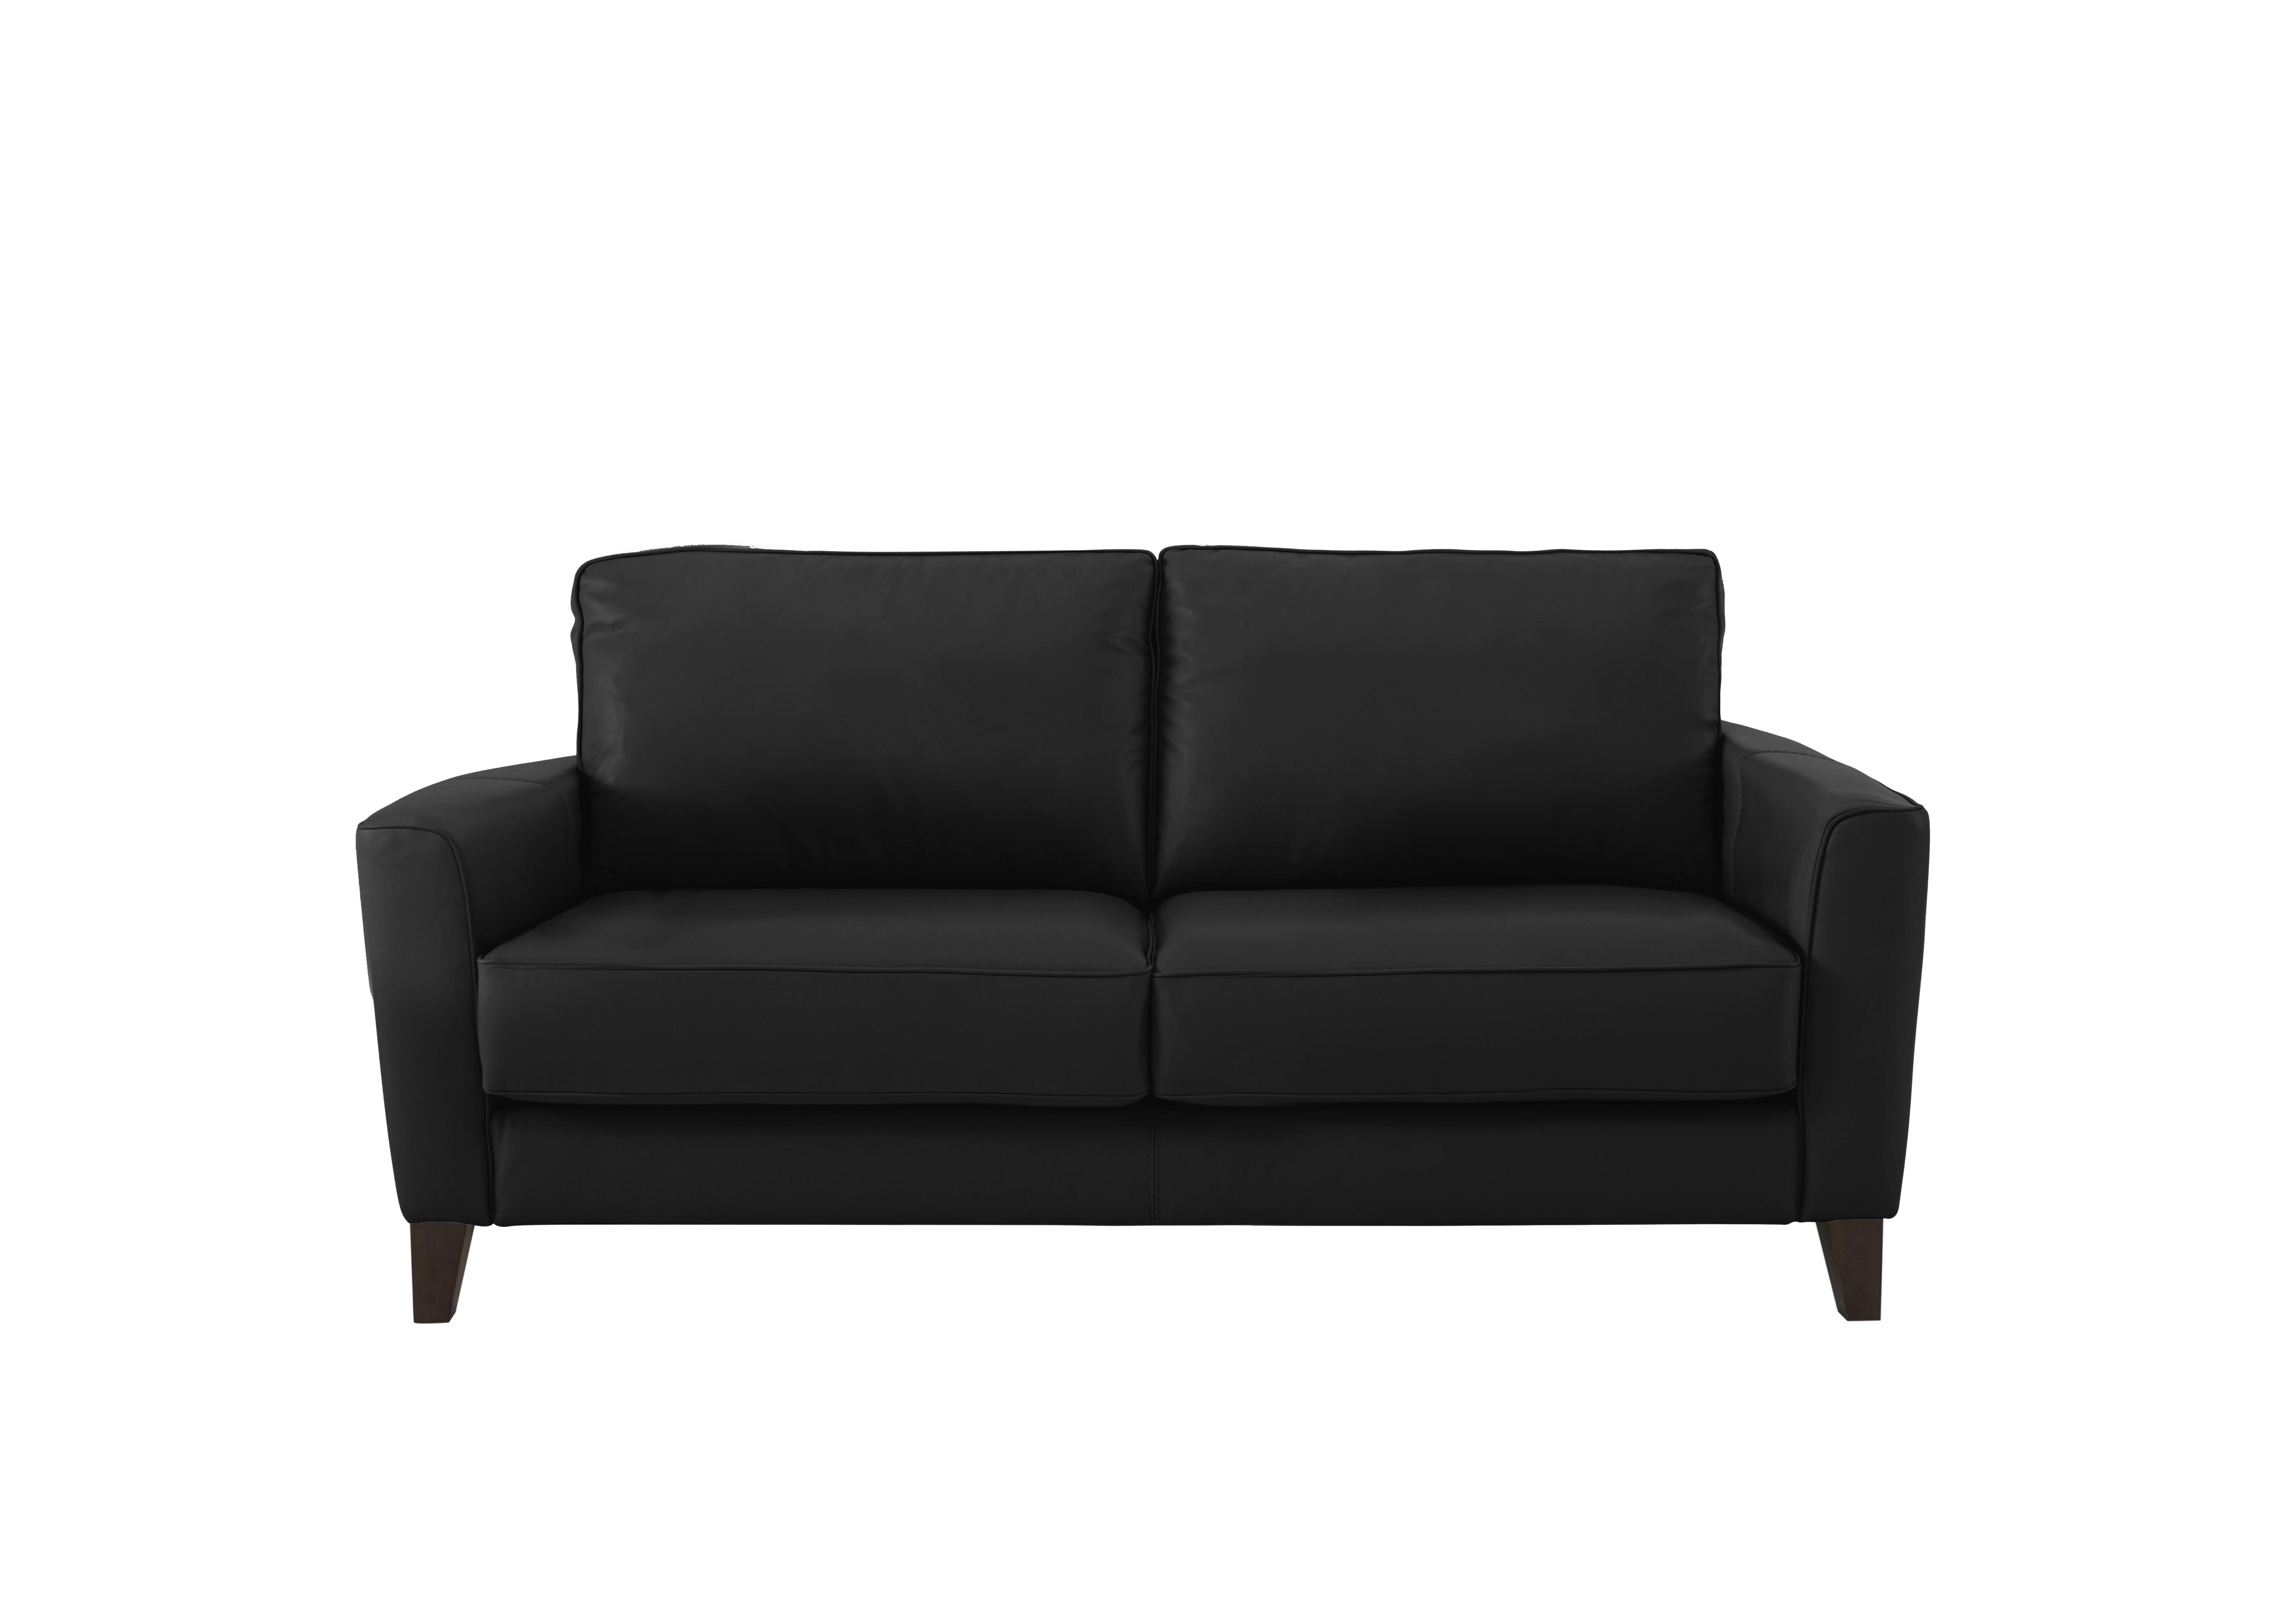 Brondby 2 Seater Leather Sofa in Bv-3500 Classic Black on Furniture Village